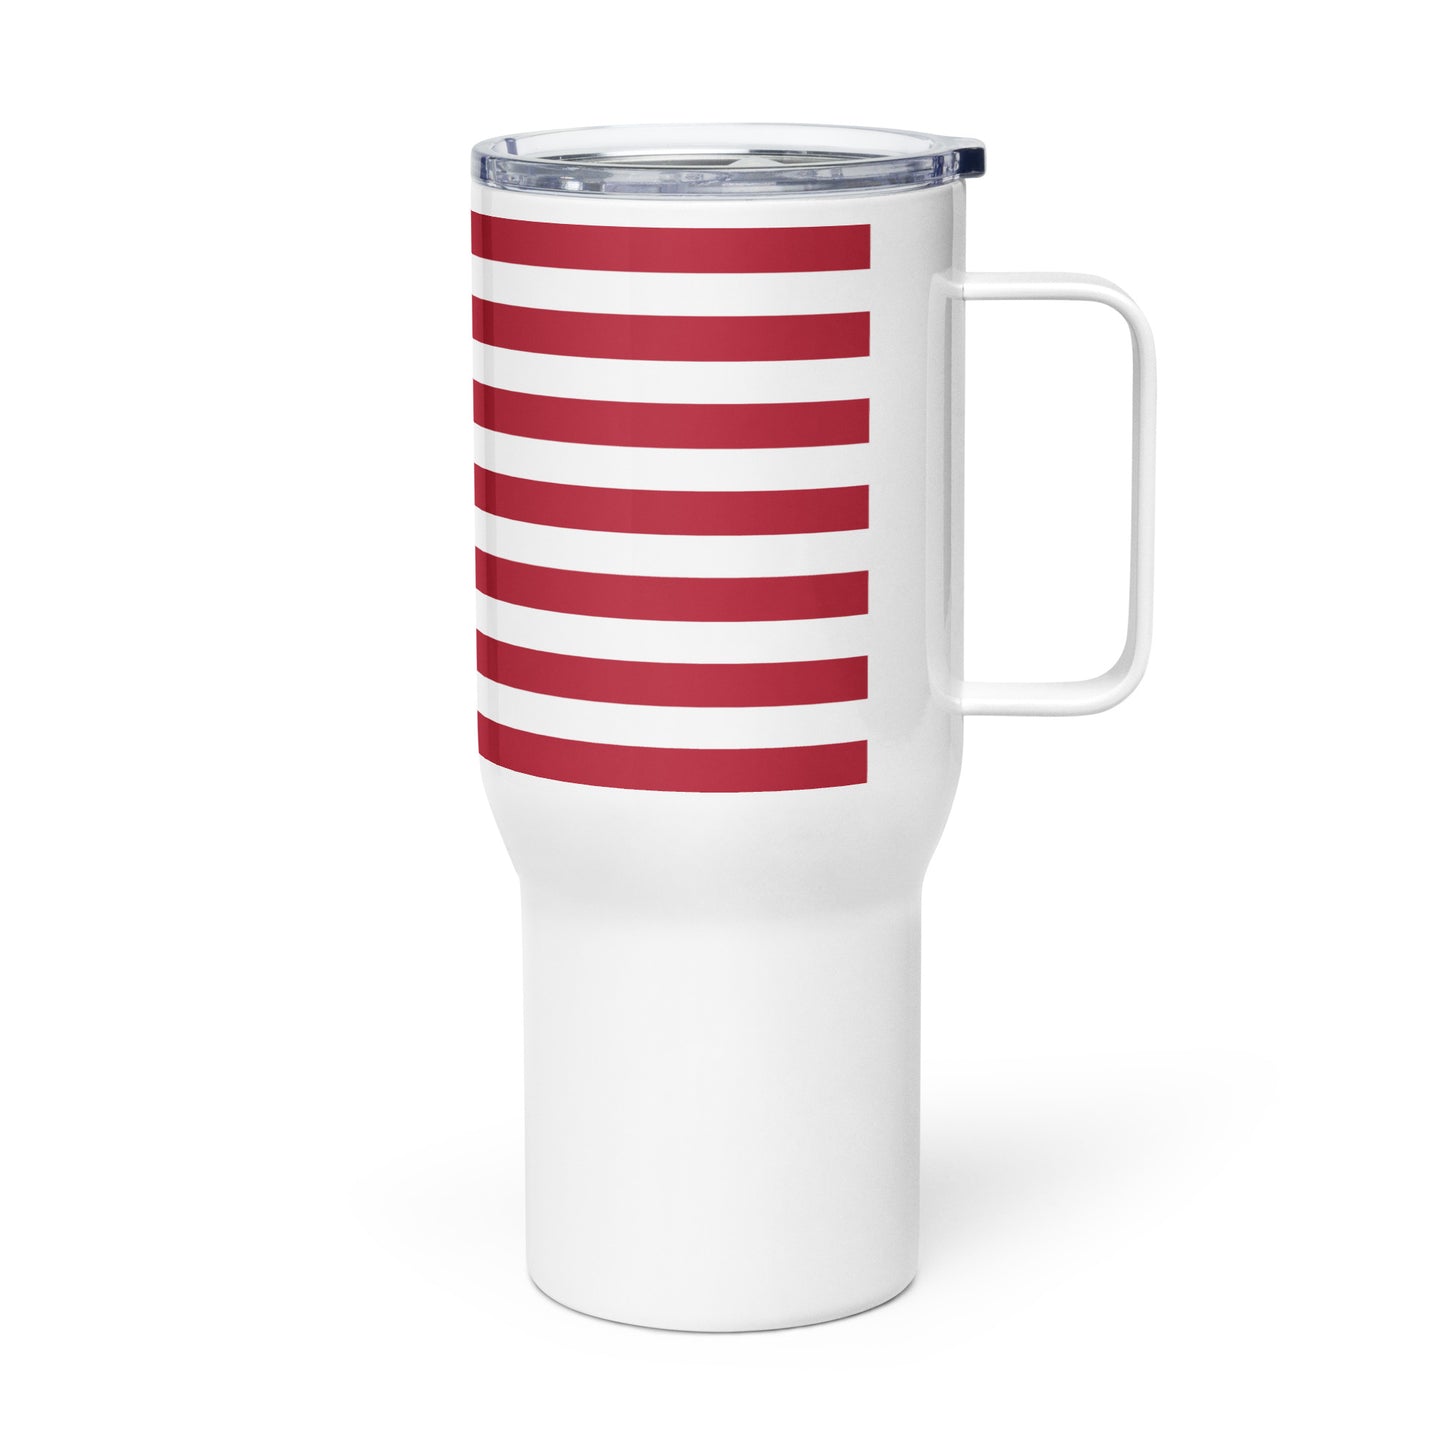 Independence Day Travel mug with a handle